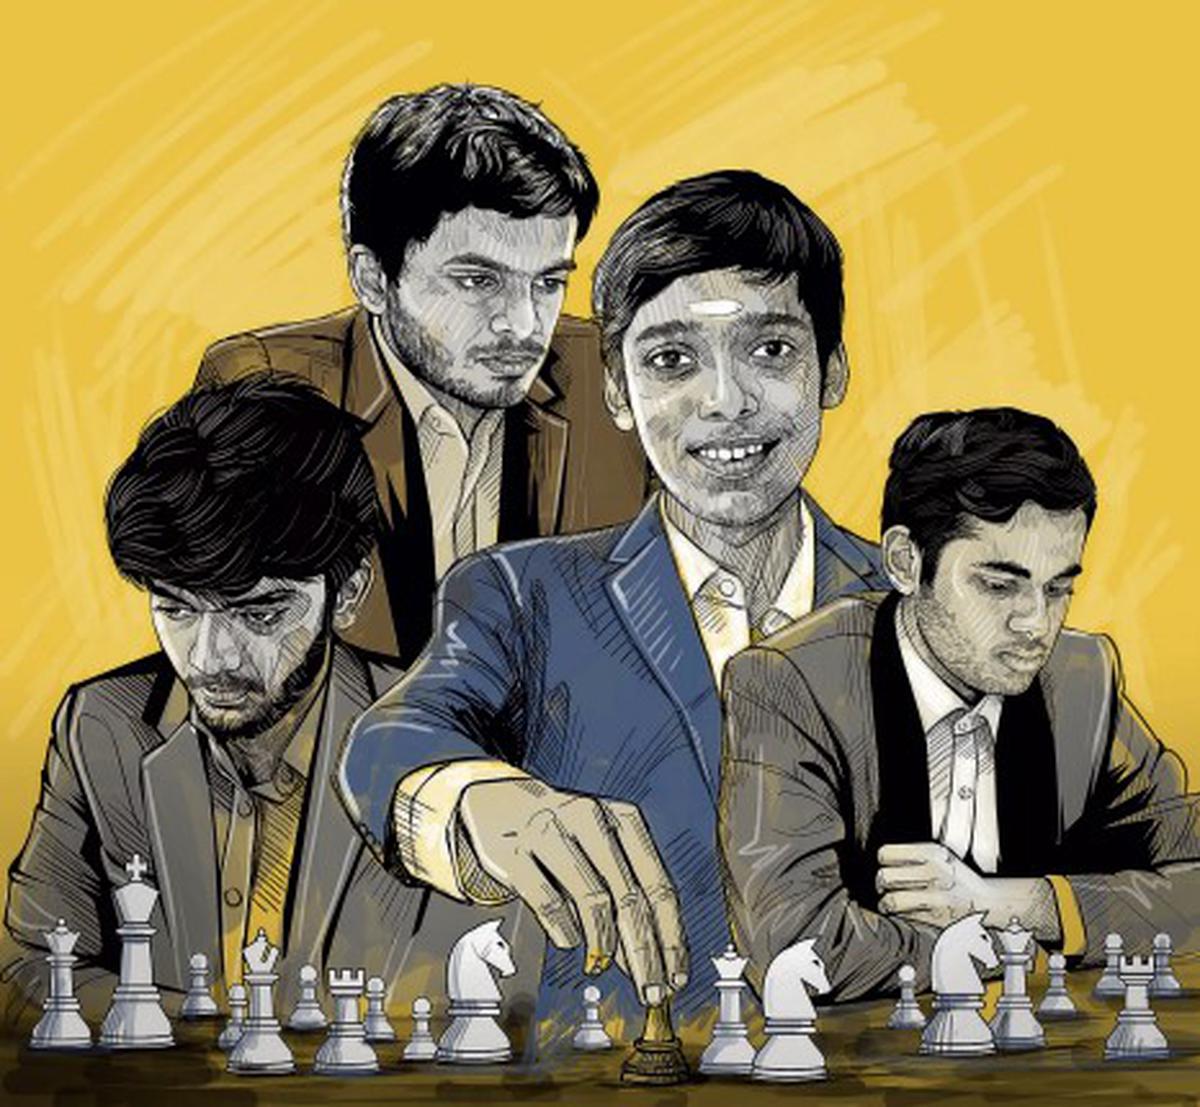 What lies ahead for Praggnanandhaa and rest of Indian chess pack?